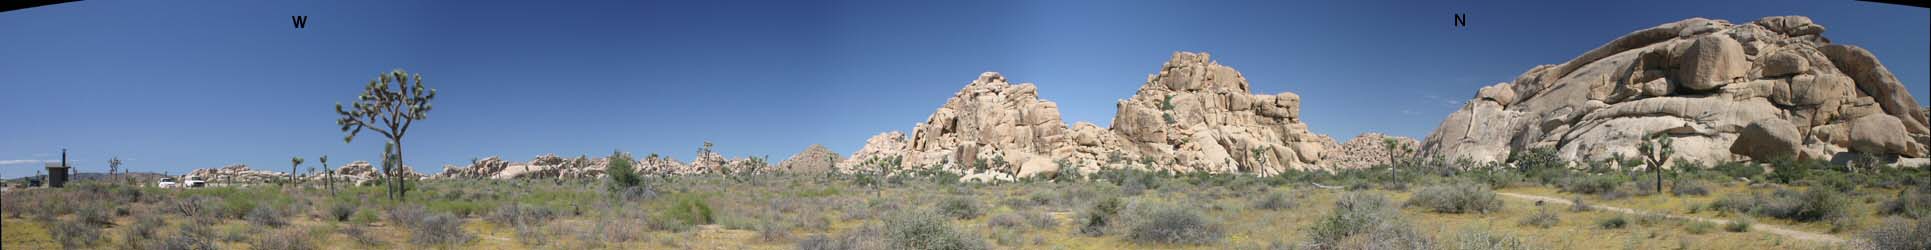 Erosion caused the monzogranite rock to be exposed after millions of years. Today these rock formations are a favorite spot for rock climbers.